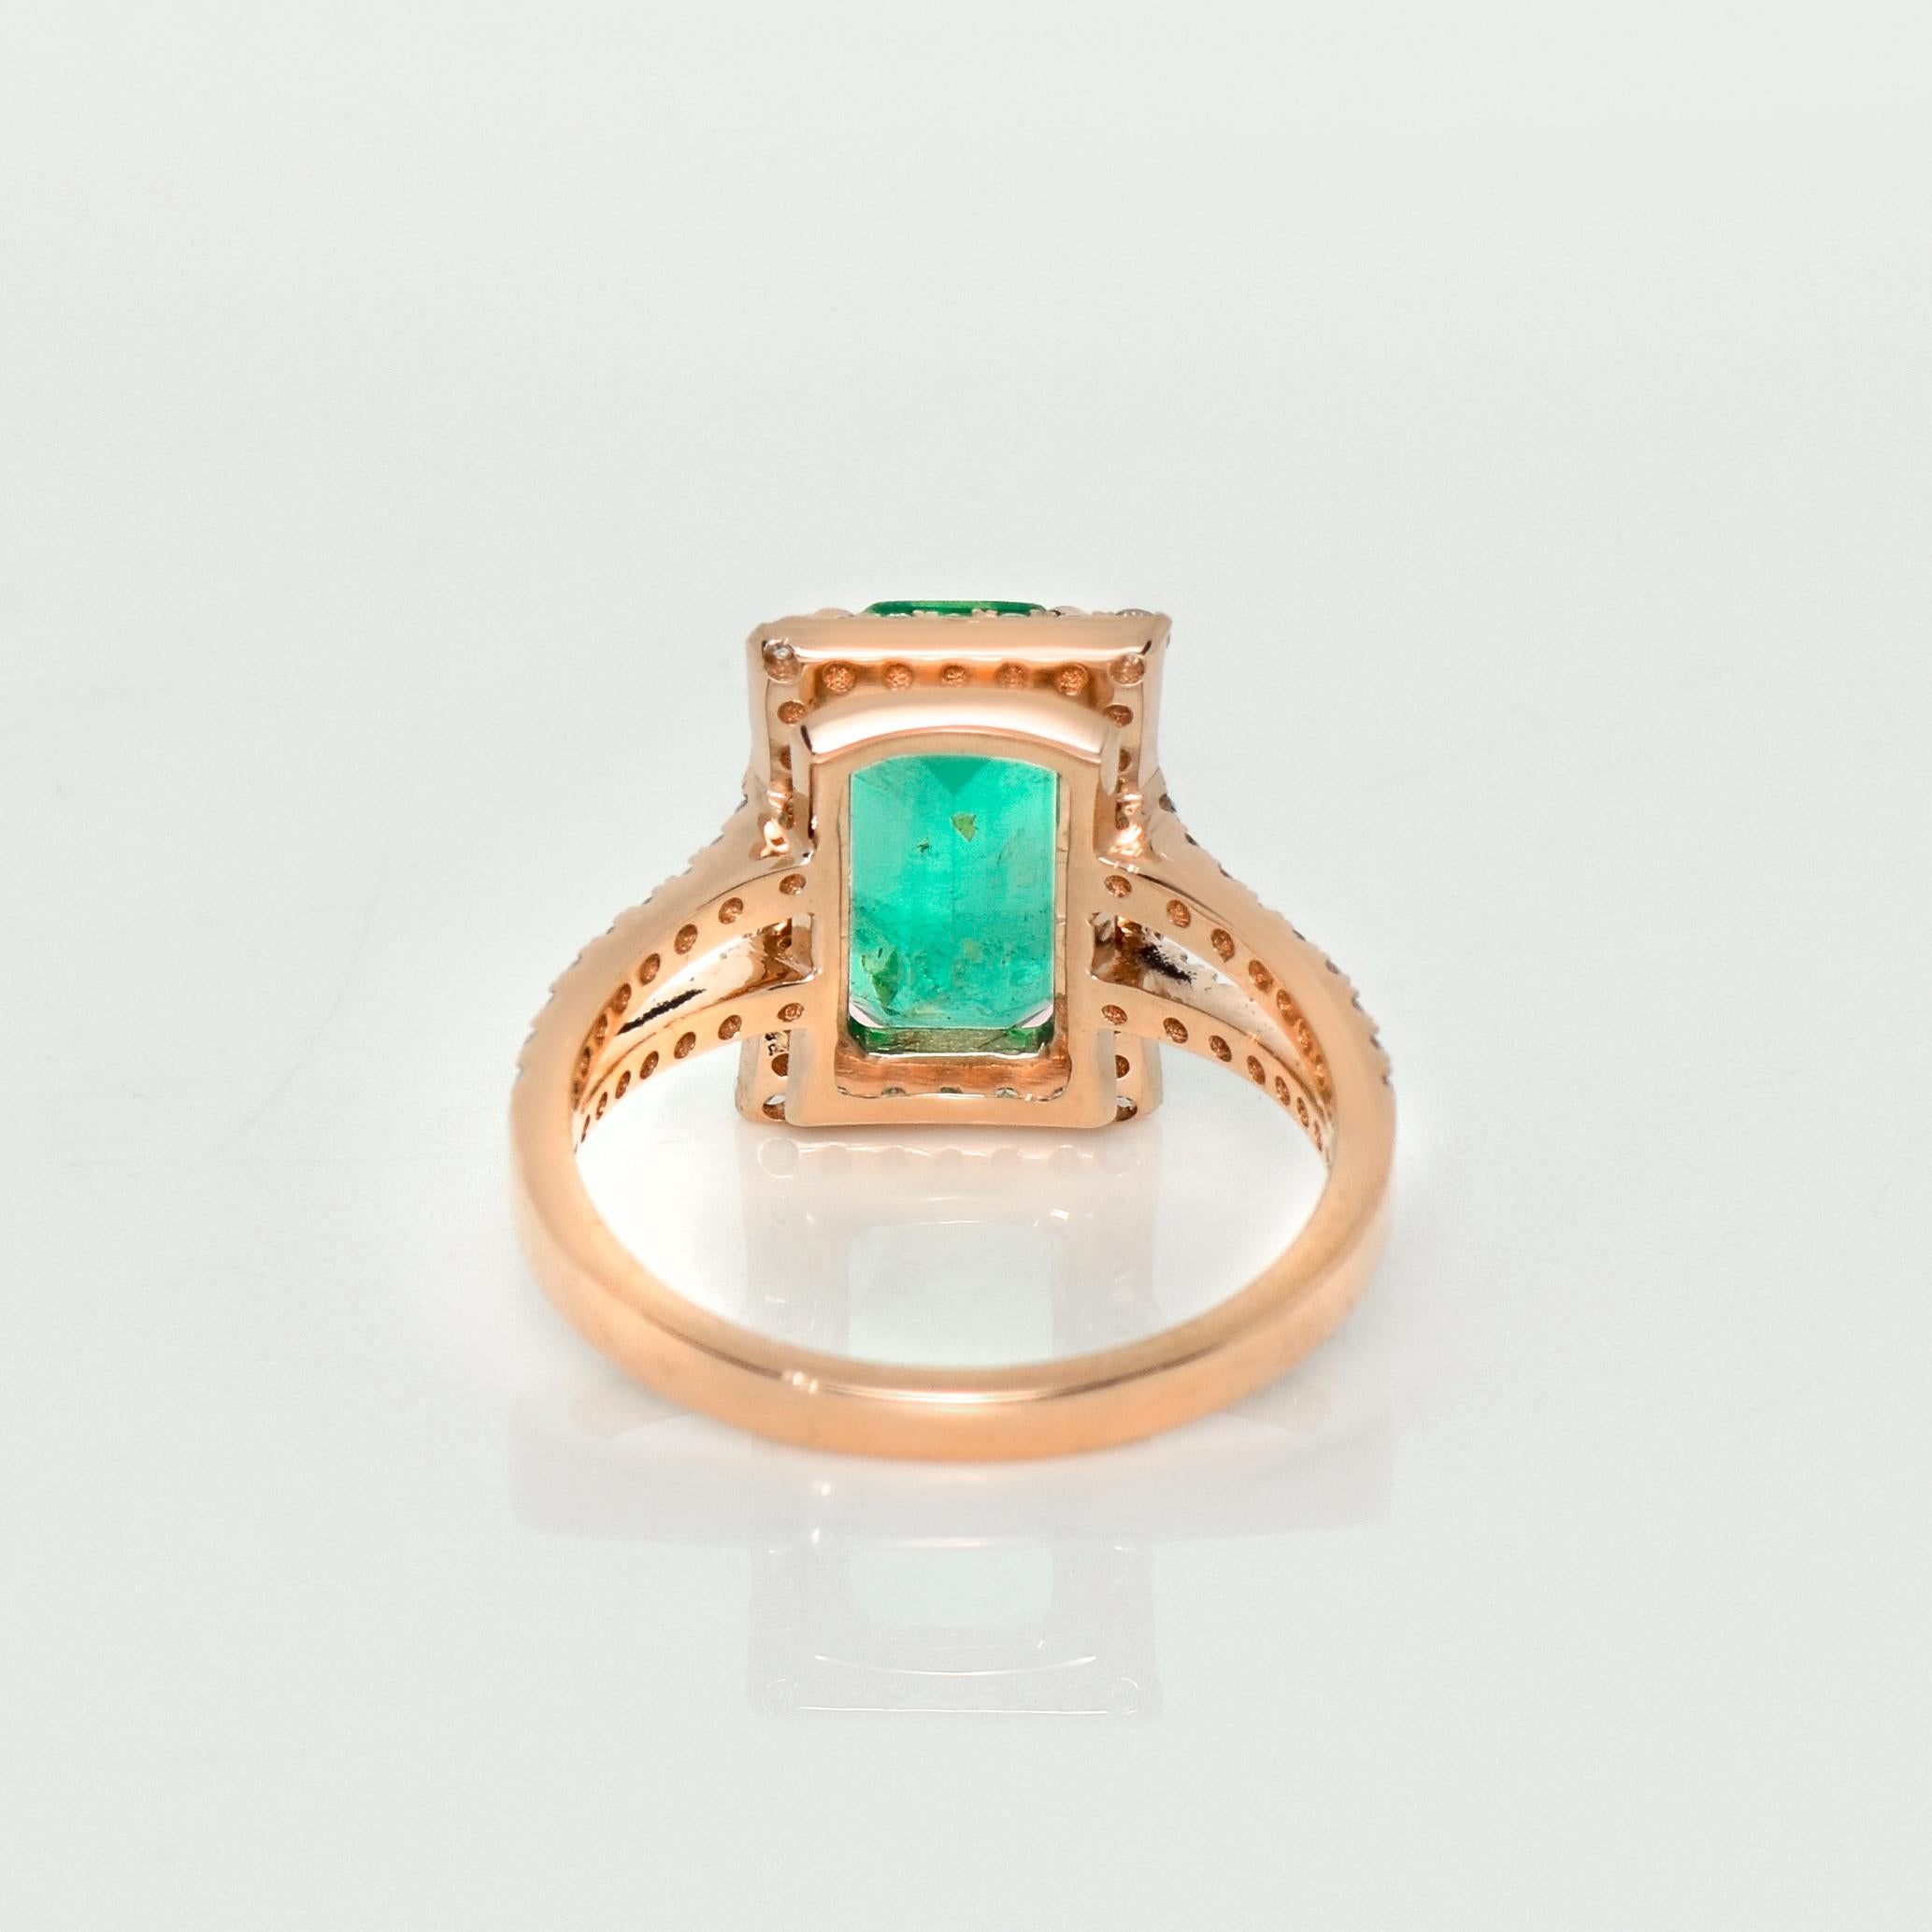 IGI 14k 3.03 Carat Natural Emerald & Diamond Antique Art Deco Engagement Ring In New Condition For Sale In Kaohsiung City, TW